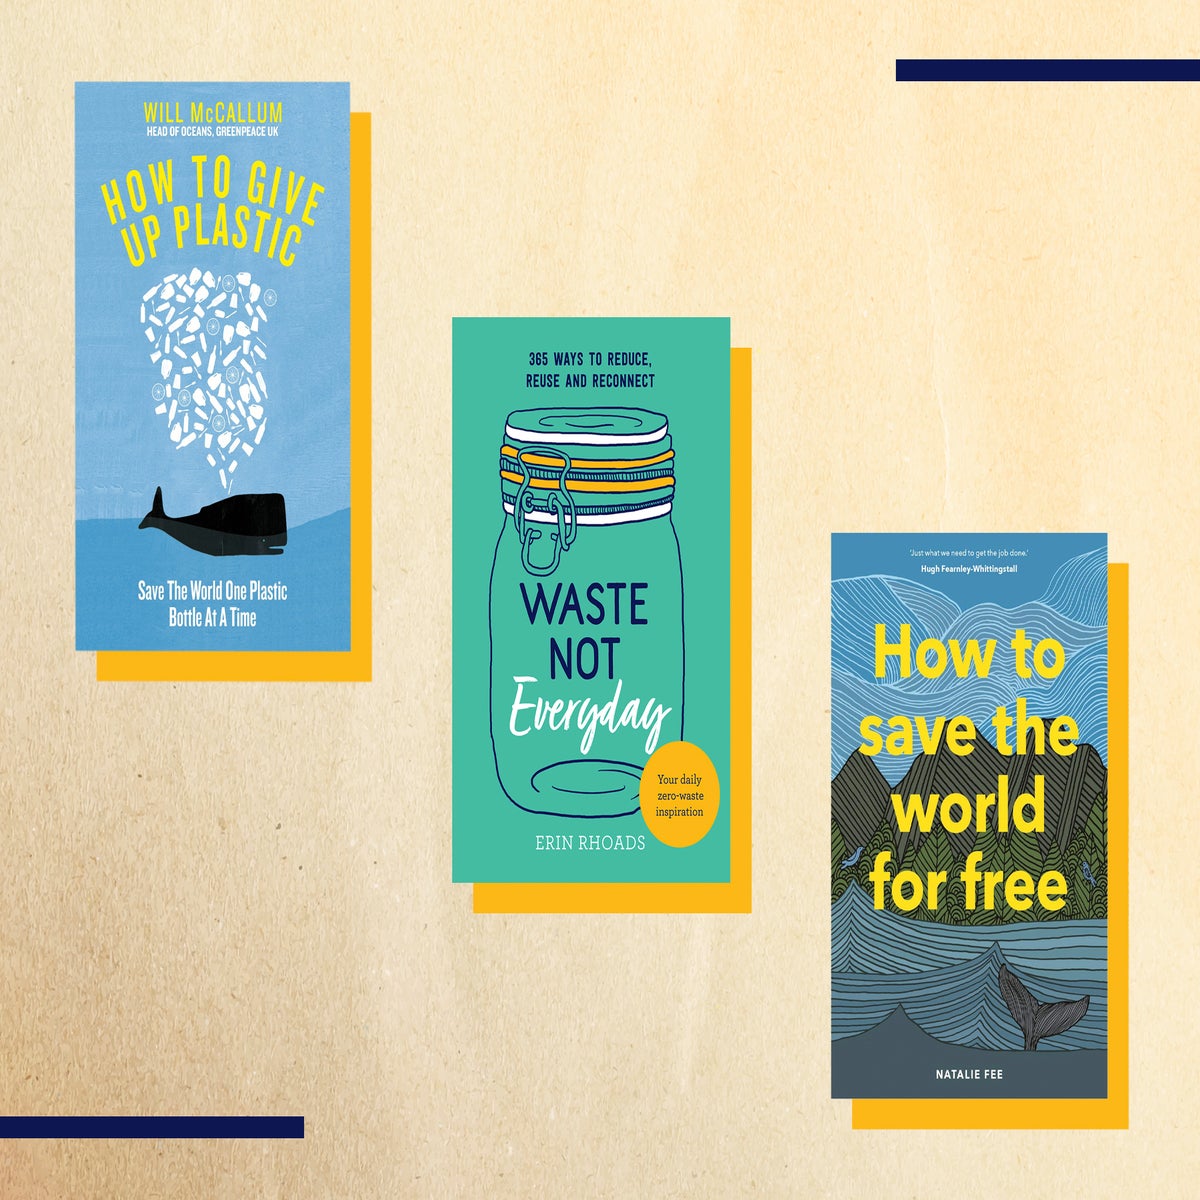 How to go plastic-free: Best books on leading a zero-waste life